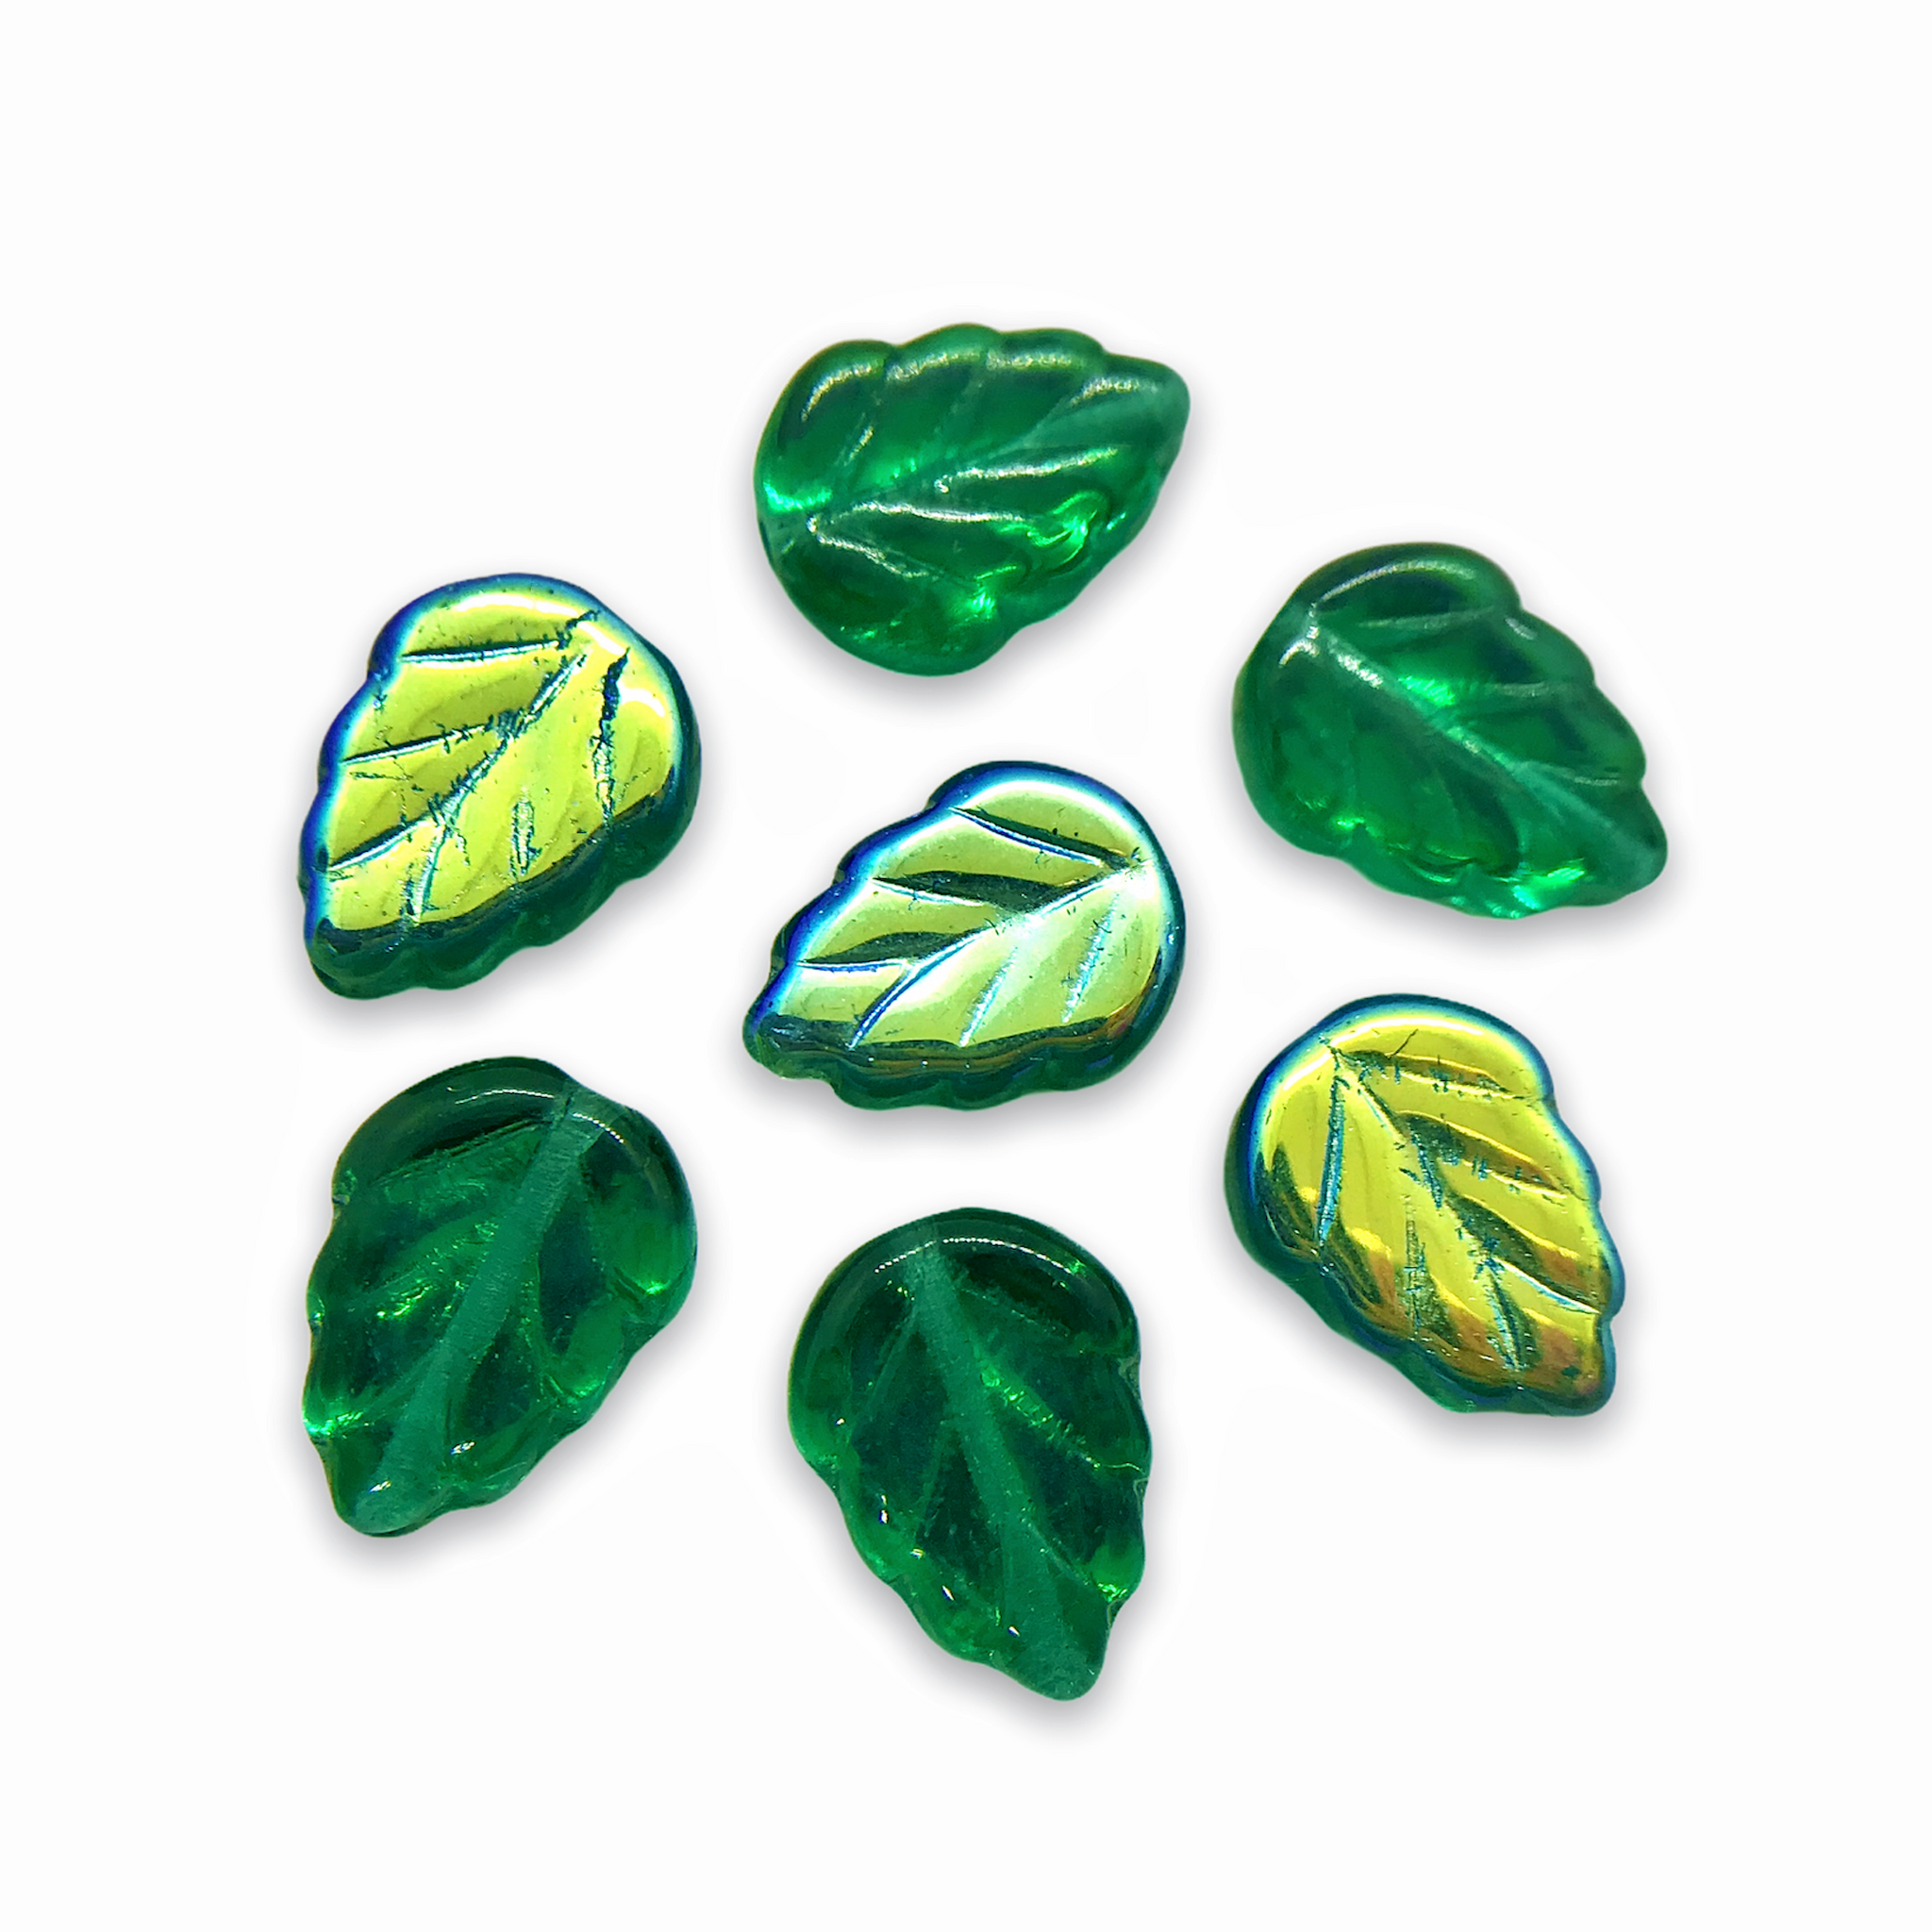 Luster Green Leaf Beads, Beads, Glass, 03545, glass beads, 18 x 8mm, green  colors, spring green, sided drilled, mix green, 25 pieces, jewelry making